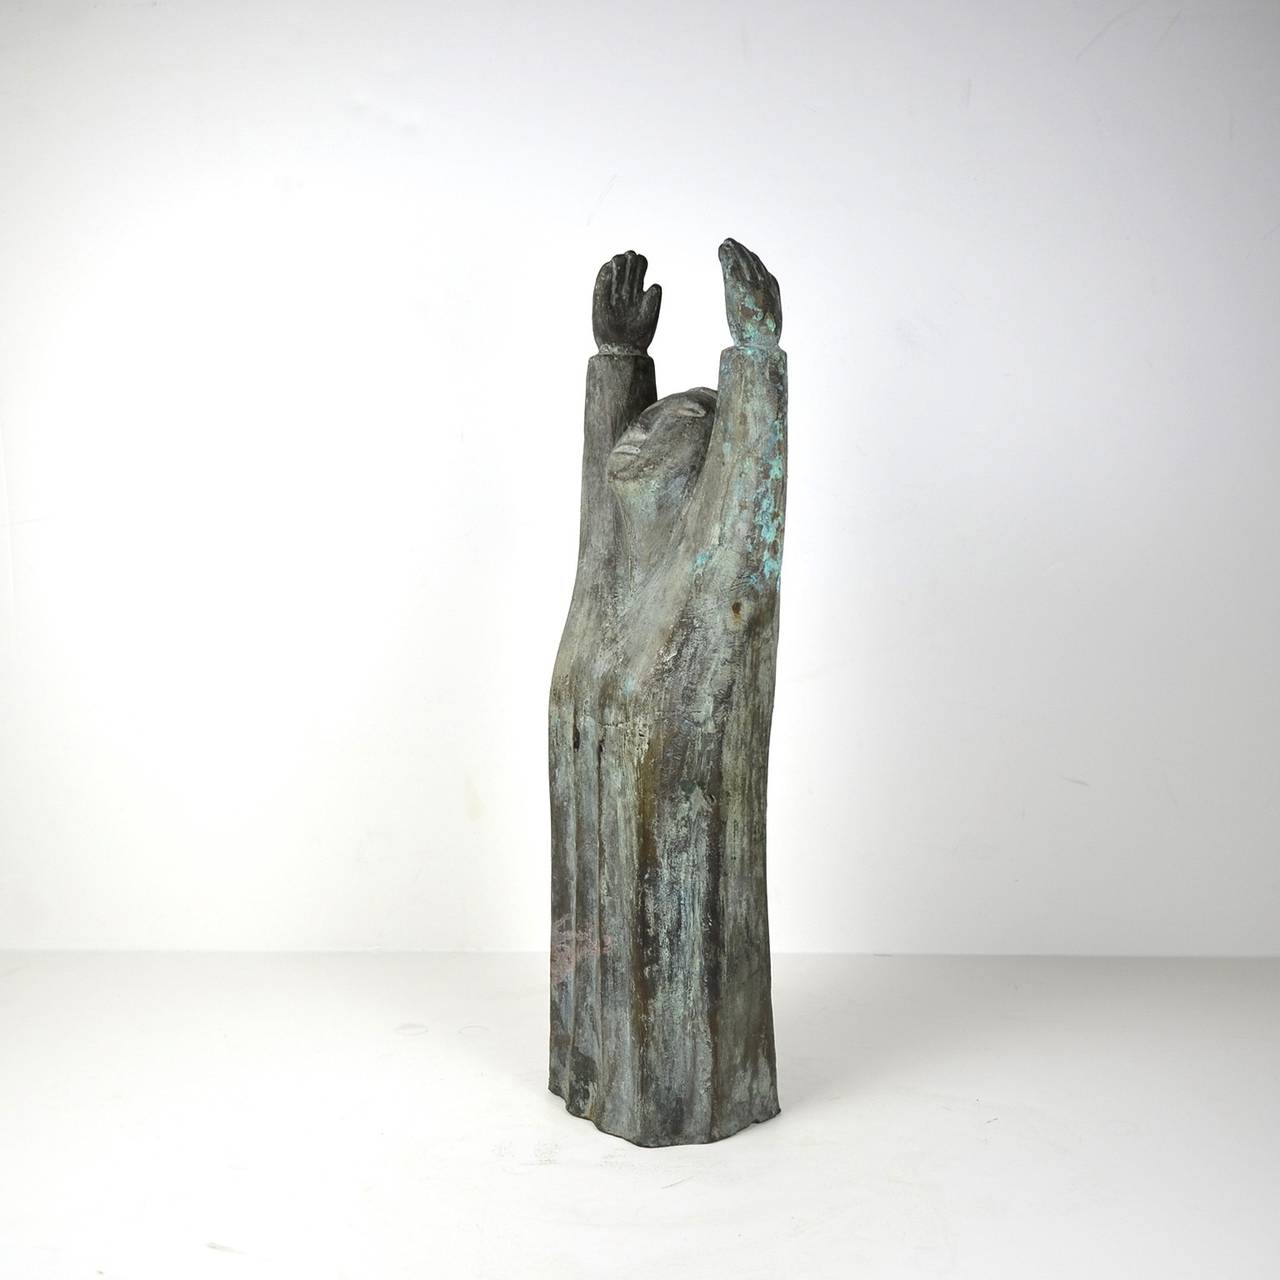 Bronze with a beautiful green patina, Kurt Lehmann born 1905 active and lived in Germany.